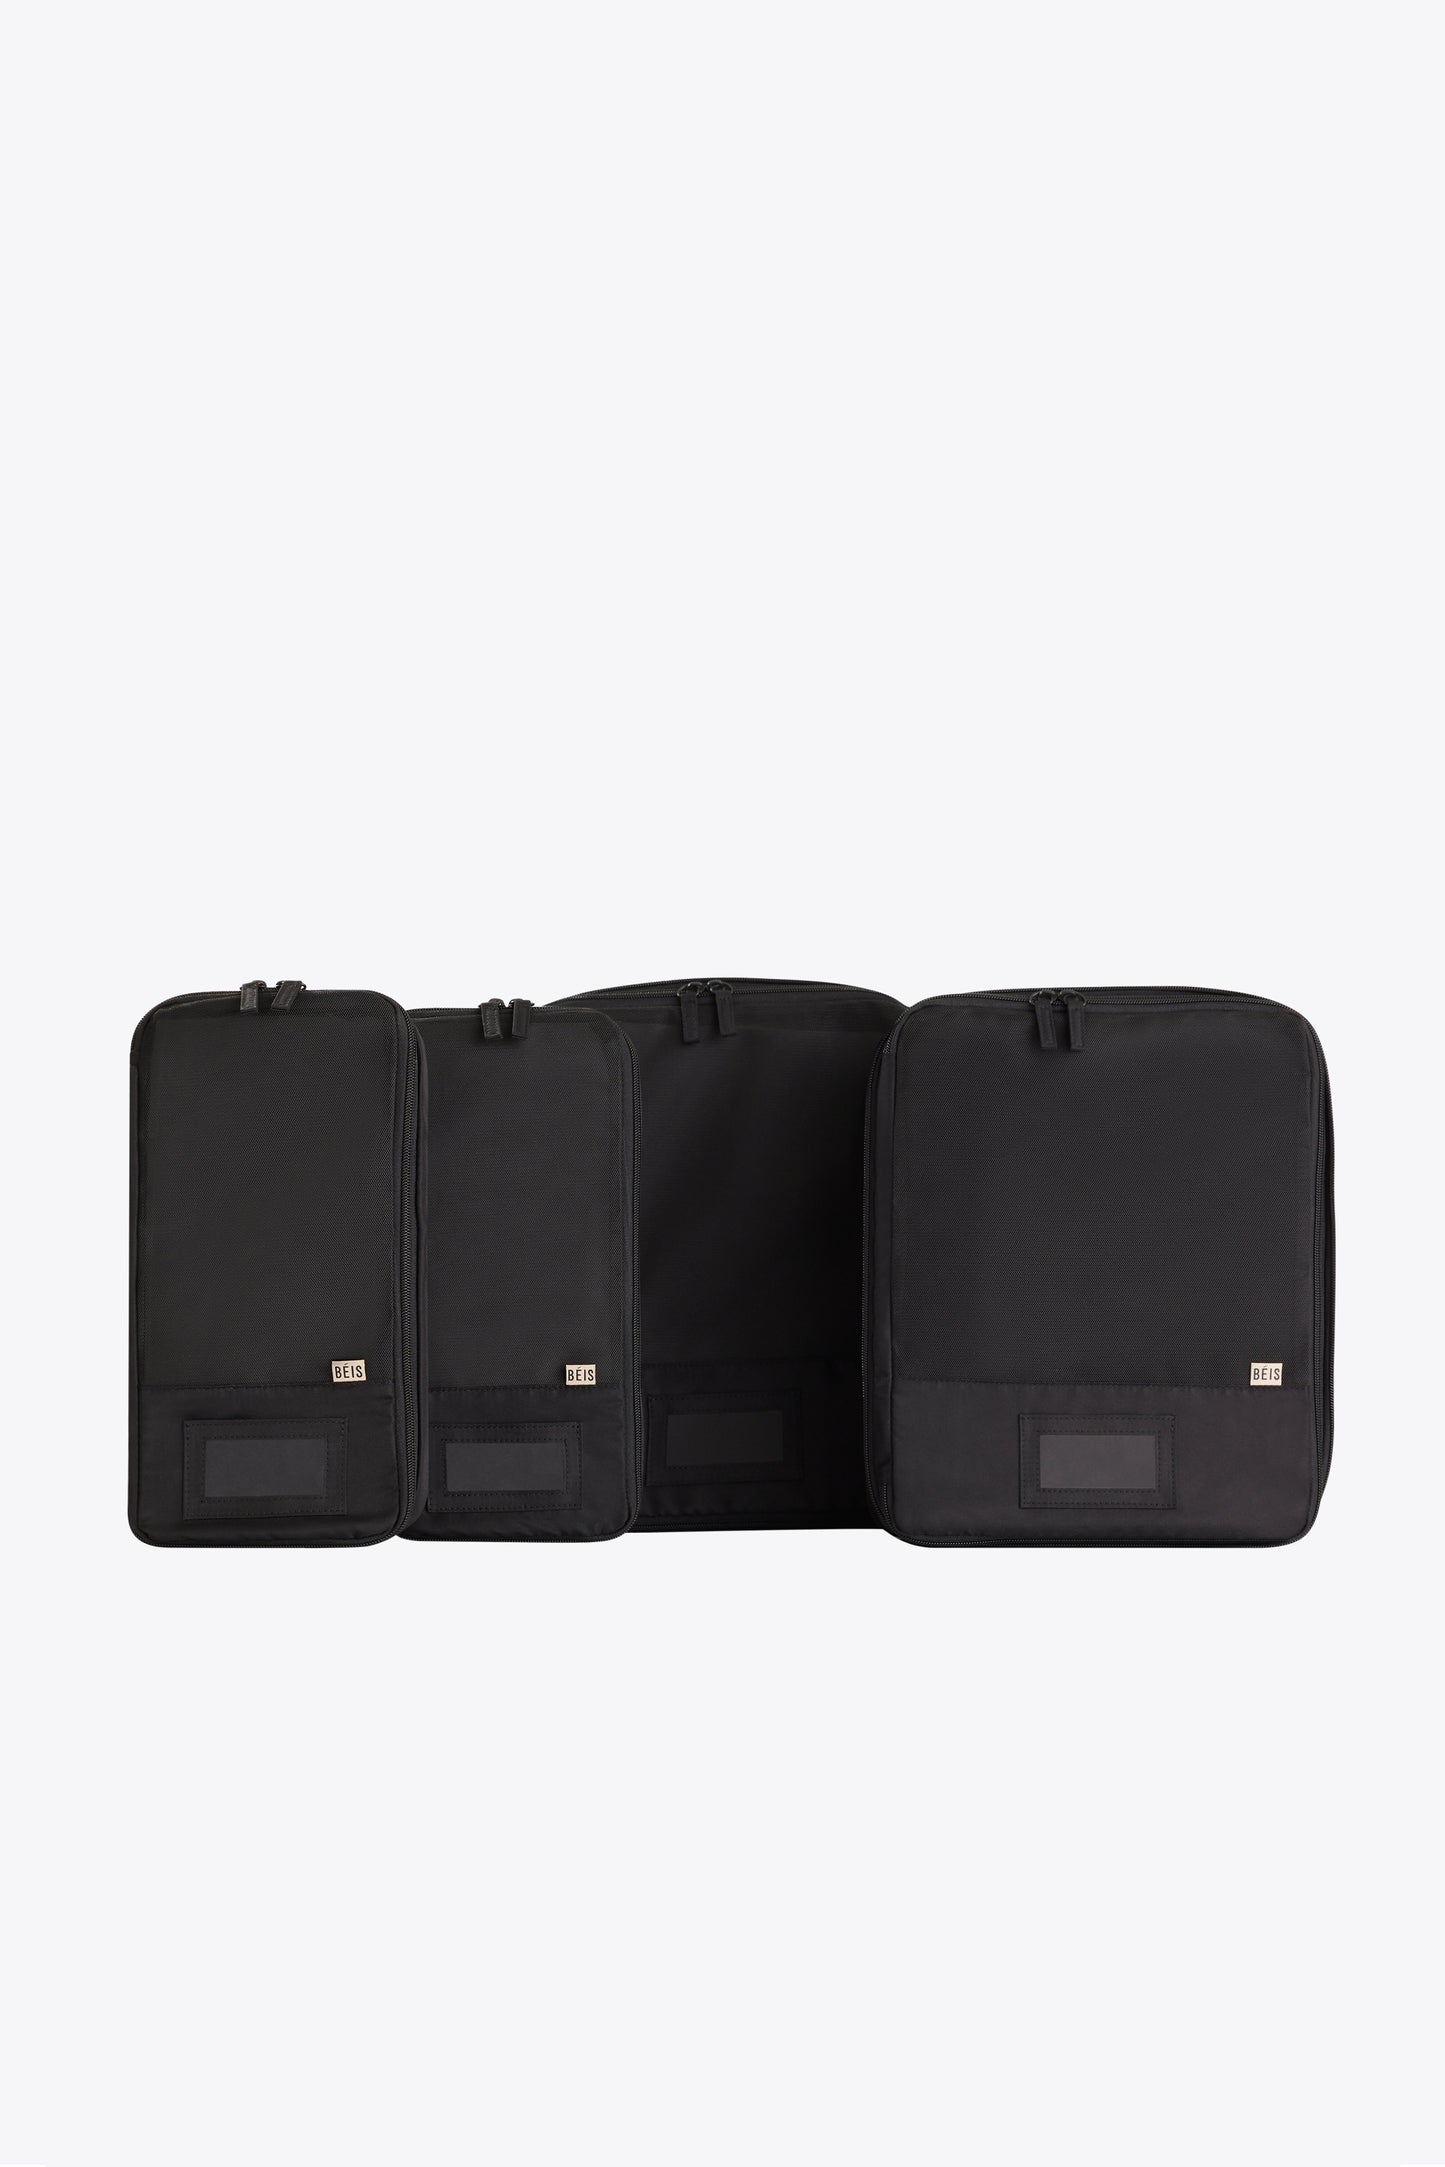 The Compression Packing Cubes 4 pc in Black